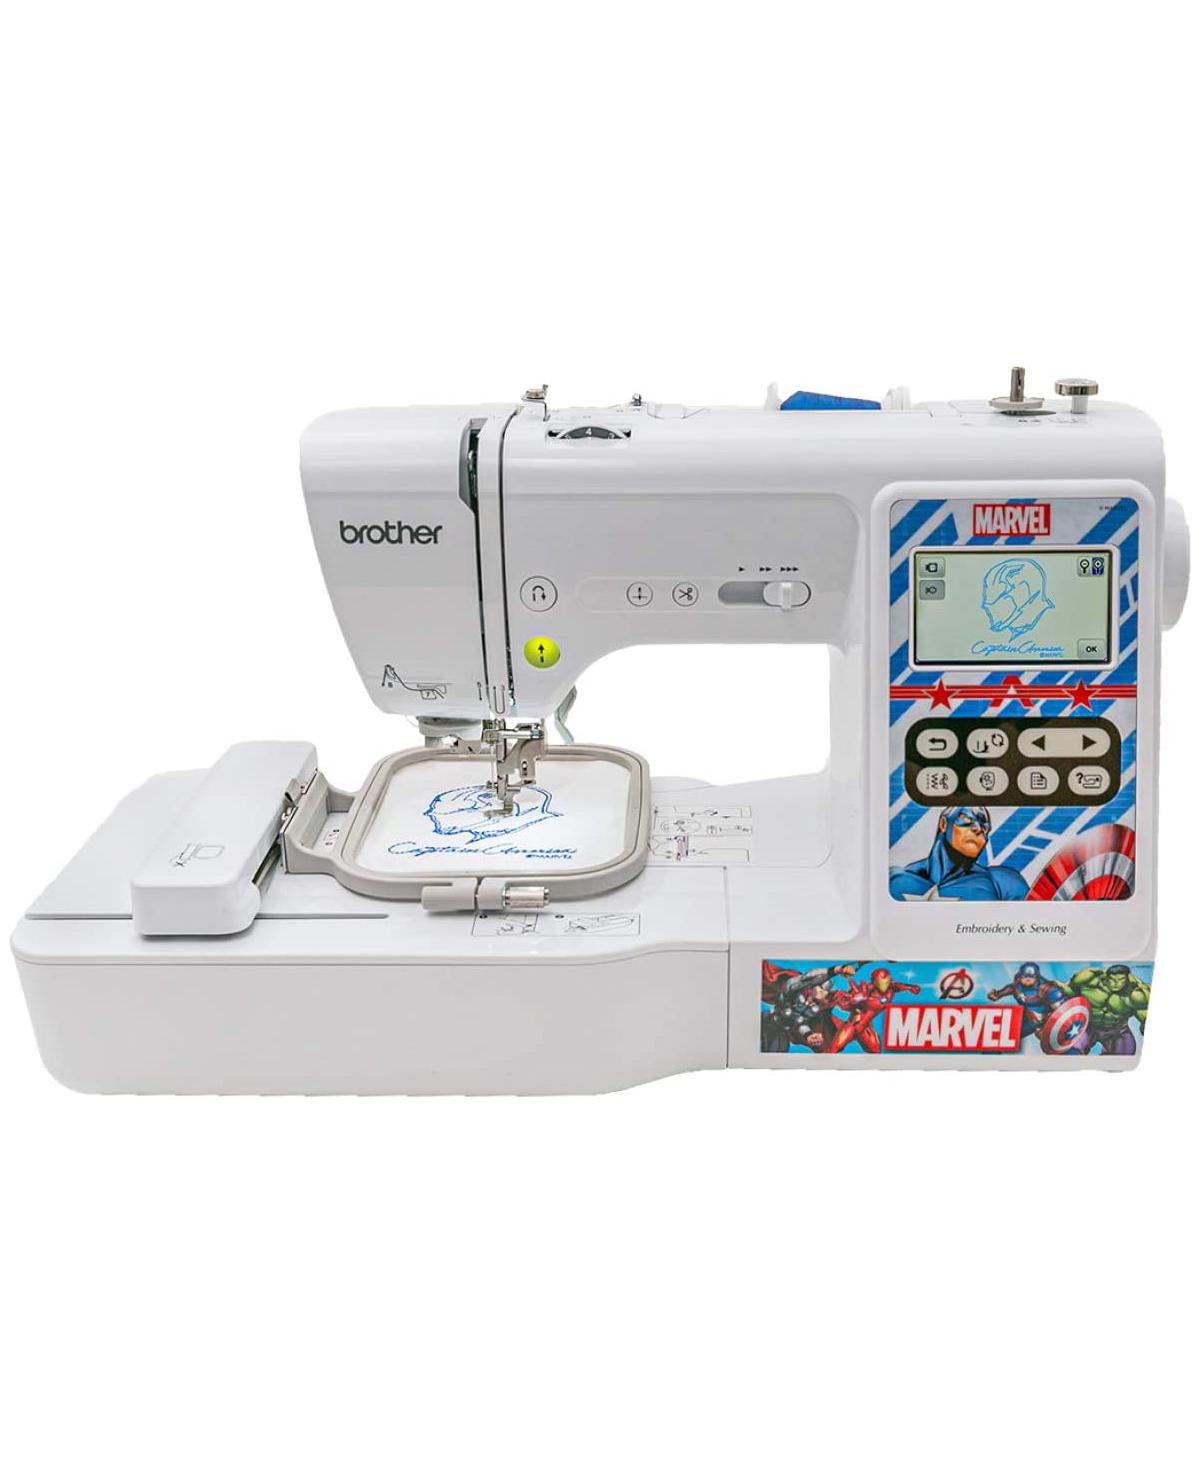 LB5000M Marvel 4" x 4" Computerized Sewing & Embroidery Machine - White